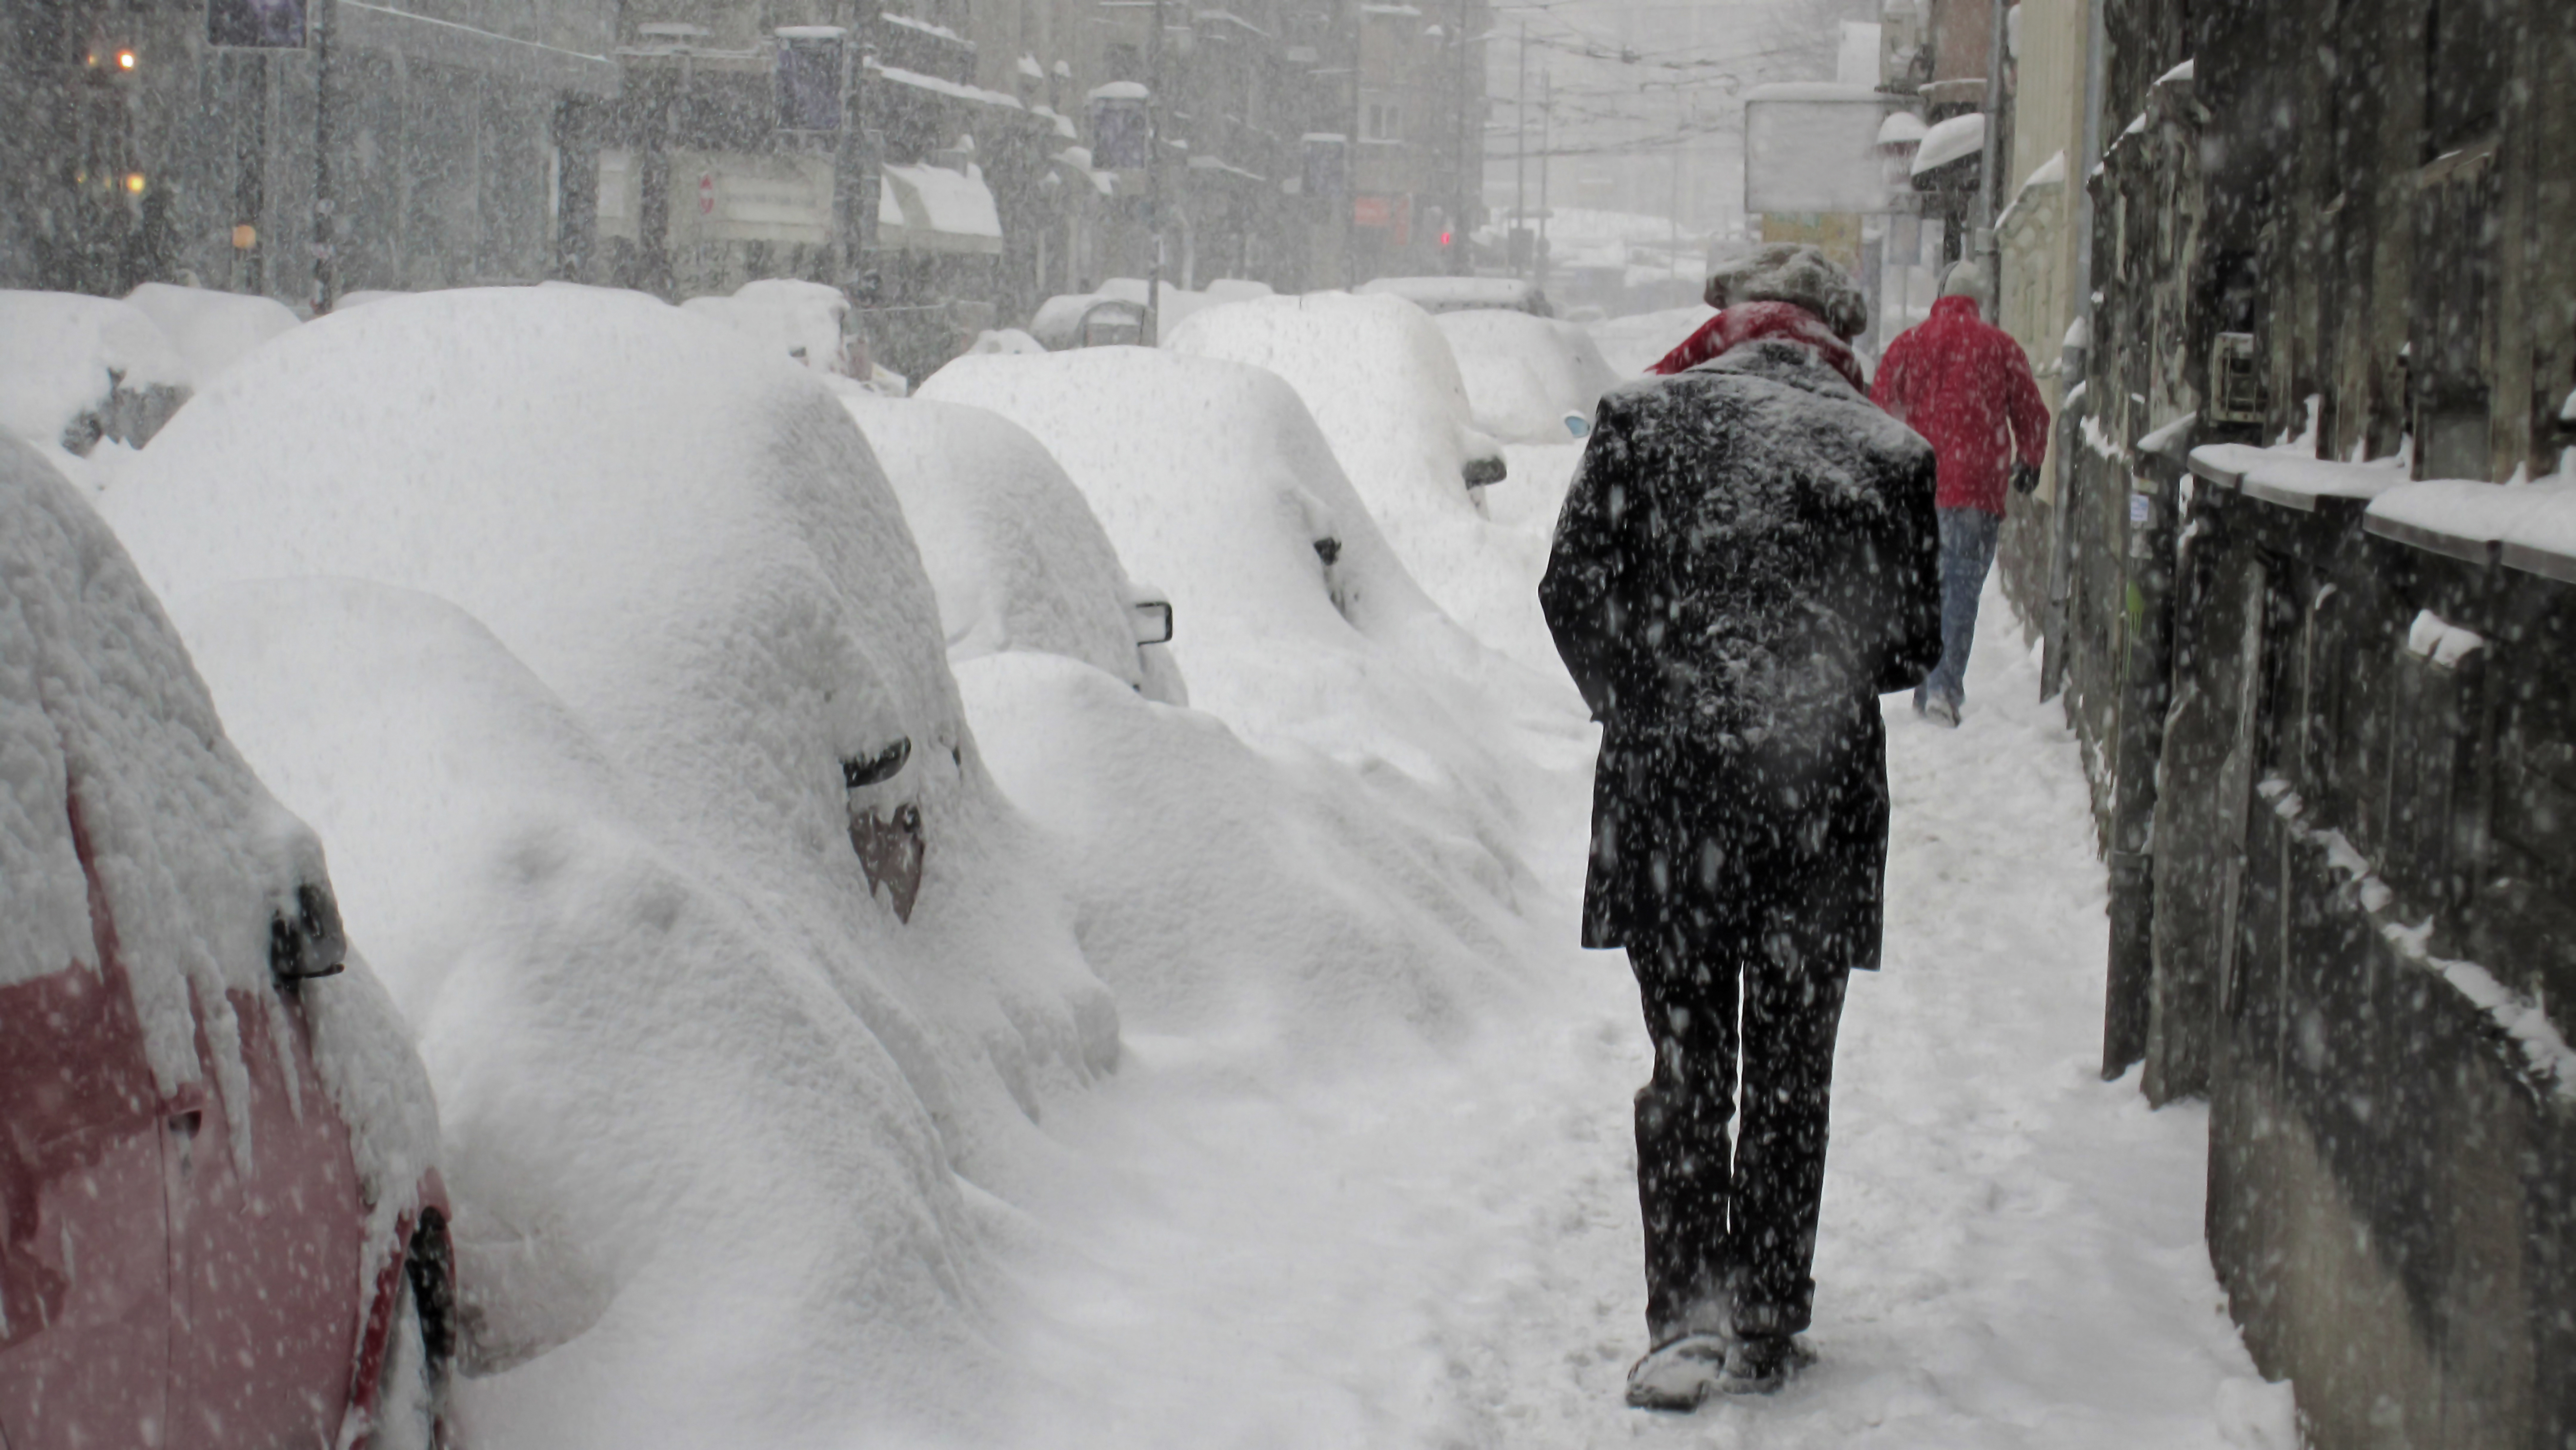 A winter scene: cars covered in a foot of swon, and two pedestrians walking away from the camera, shoulders hunched agains the cold snow